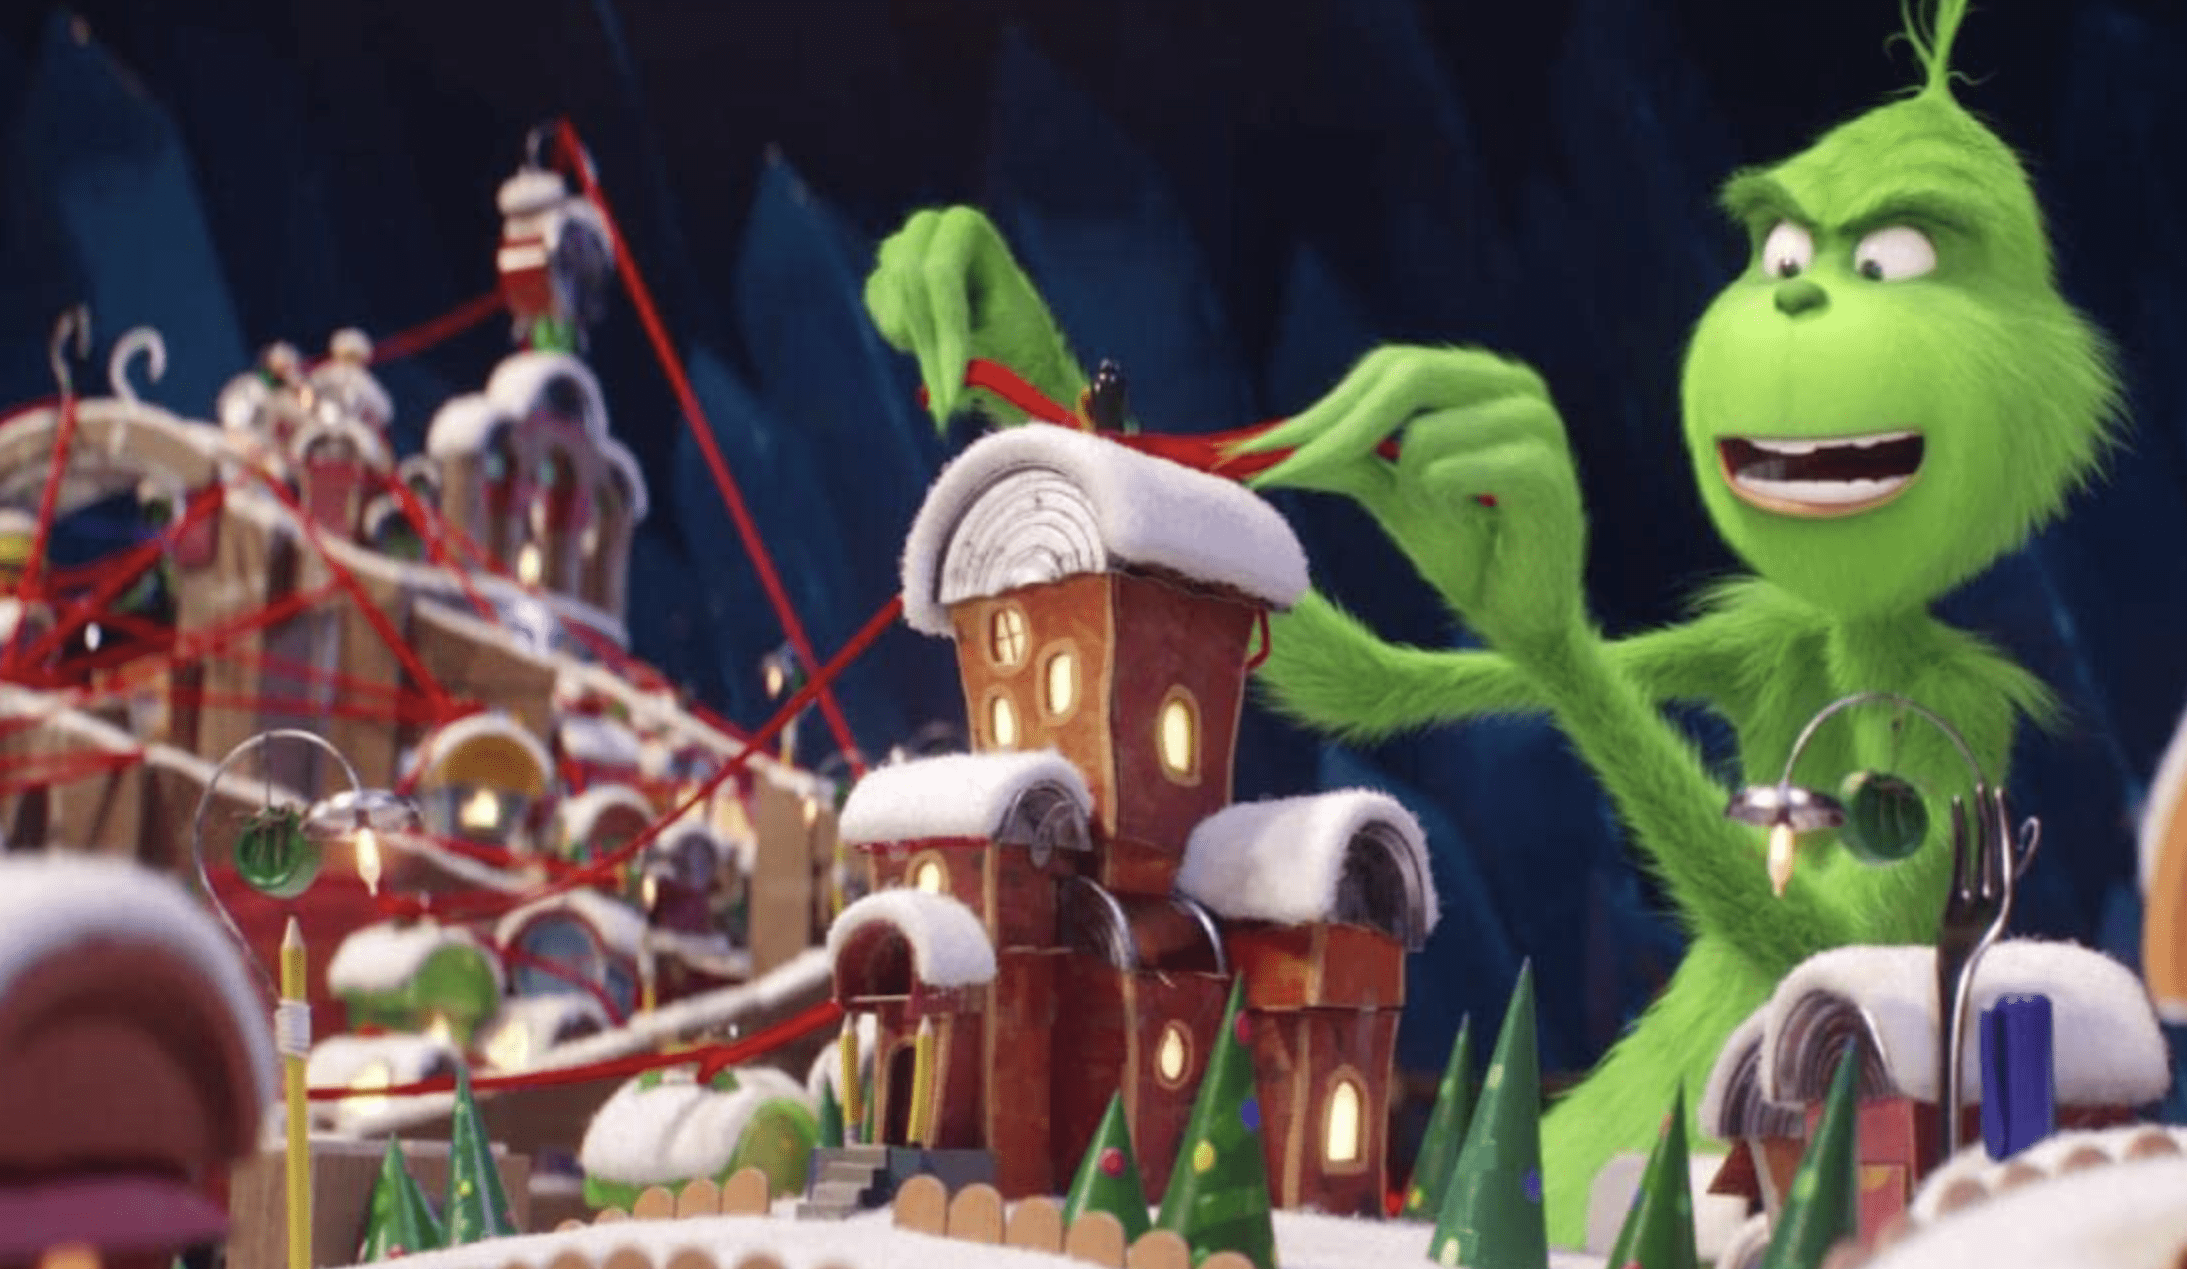 The Grinch plays with a red string on a homemade map of Whoville in this image from Universal Pictures.